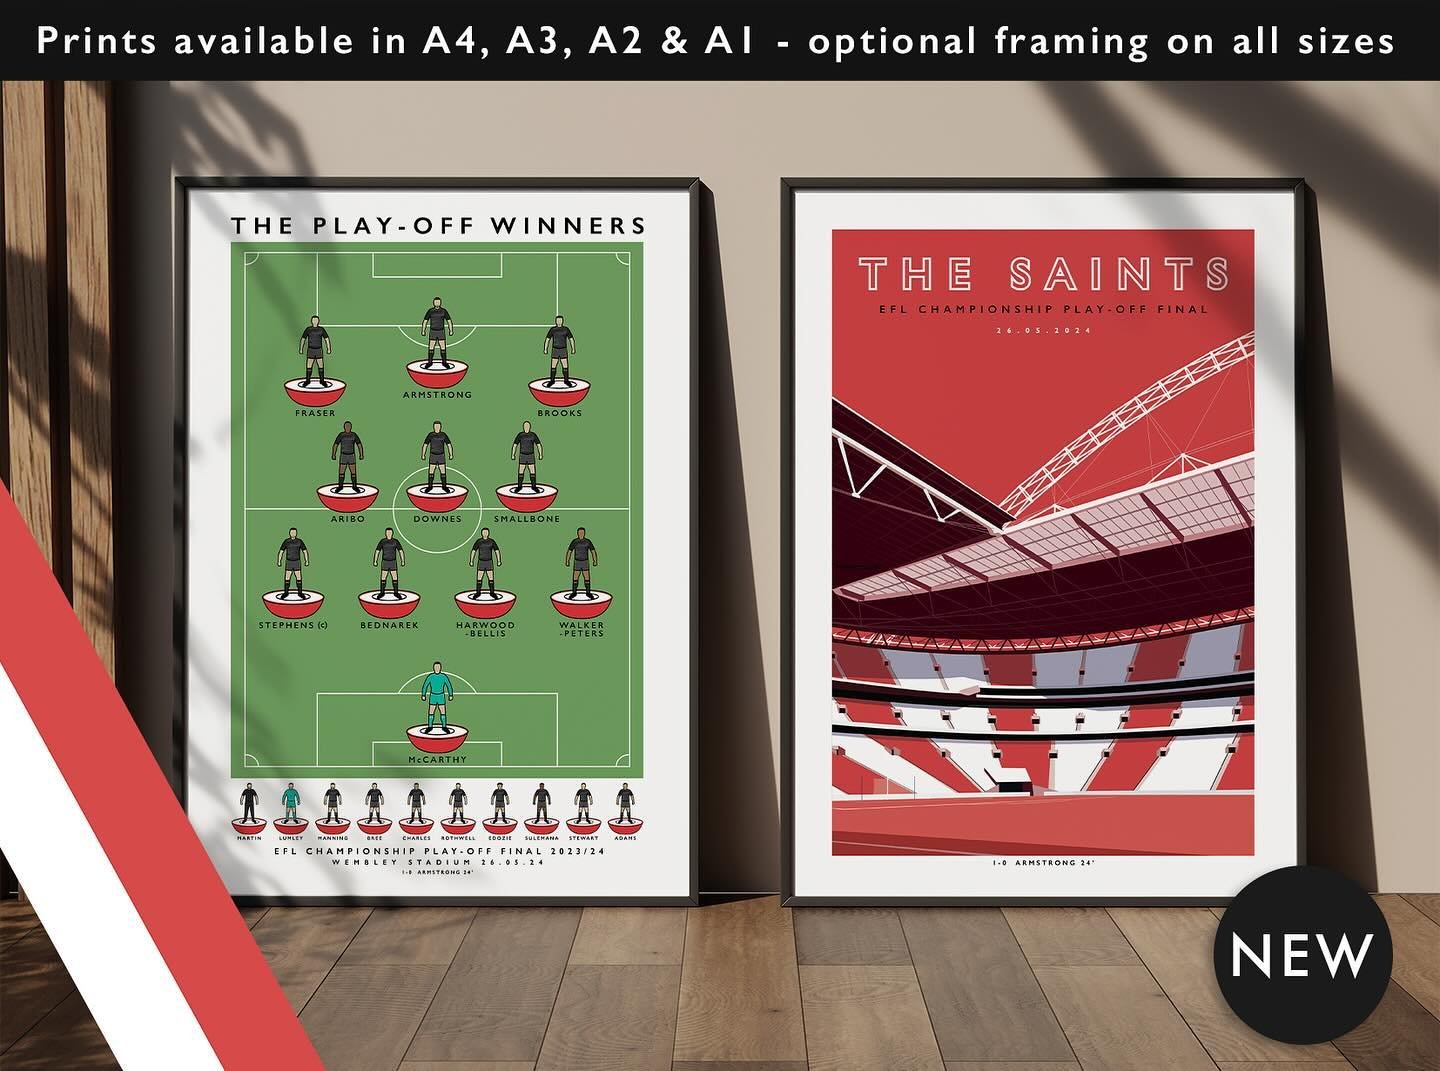 NEW: Southampton The Play-Off Winners &amp; The Saints Wembley

Get 10% off until midnight on Tuesday with the discount code: 
THE-SAINTS 

Shop now: matthewjiwood.com/subbuteo-xis/s&hellip;

Prints available in A4, A3, A2 &amp; A1 with optional fram